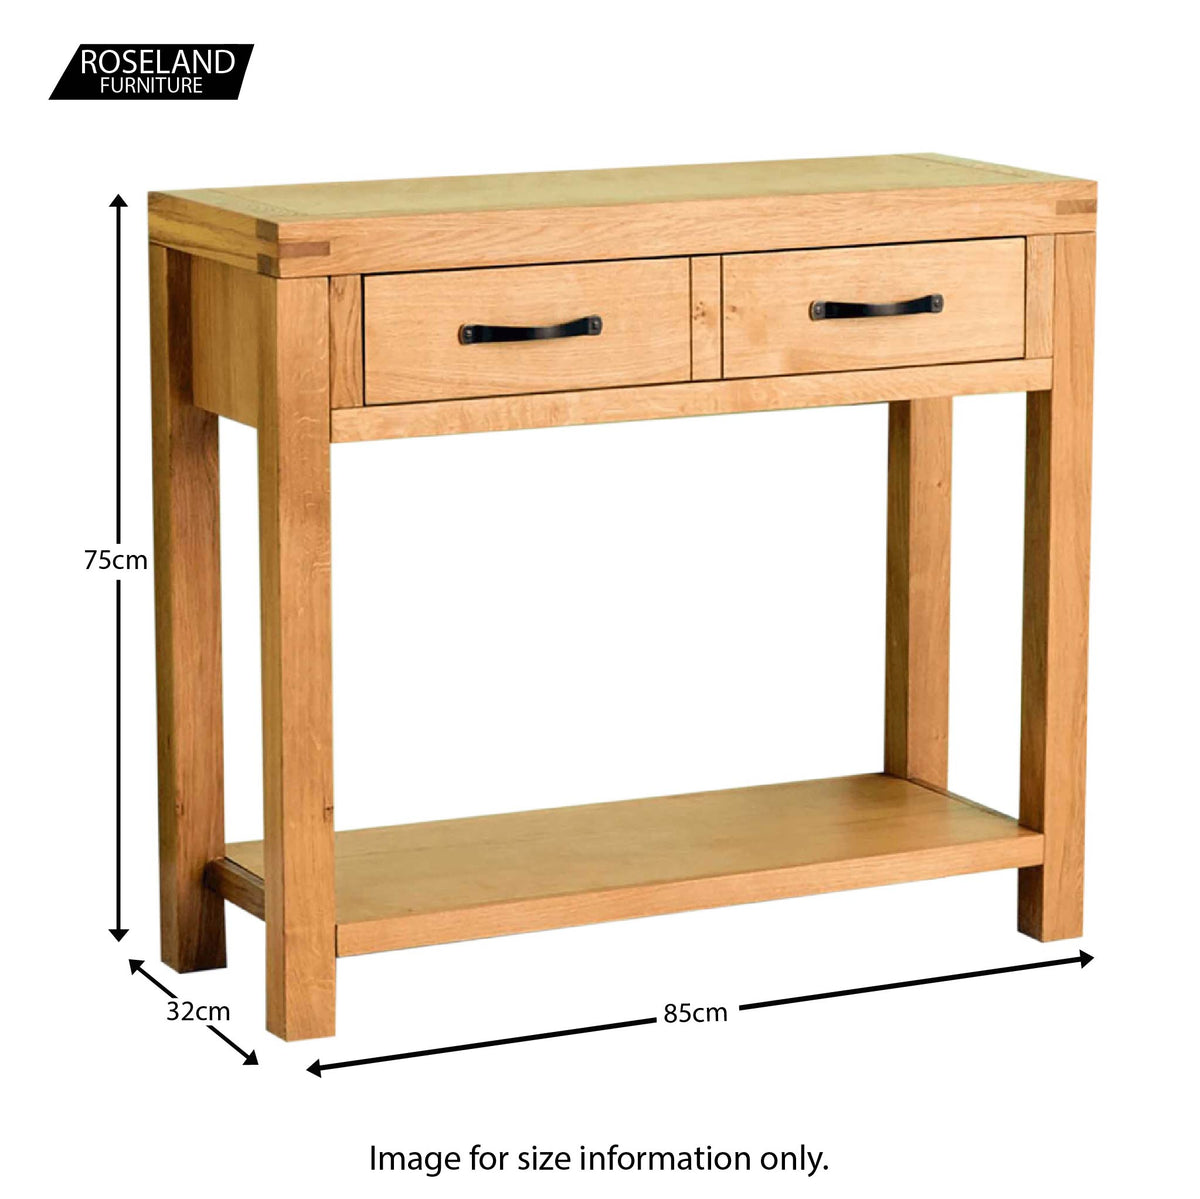  Abbey Waxed Oak Console Table with Drawer - Size guide